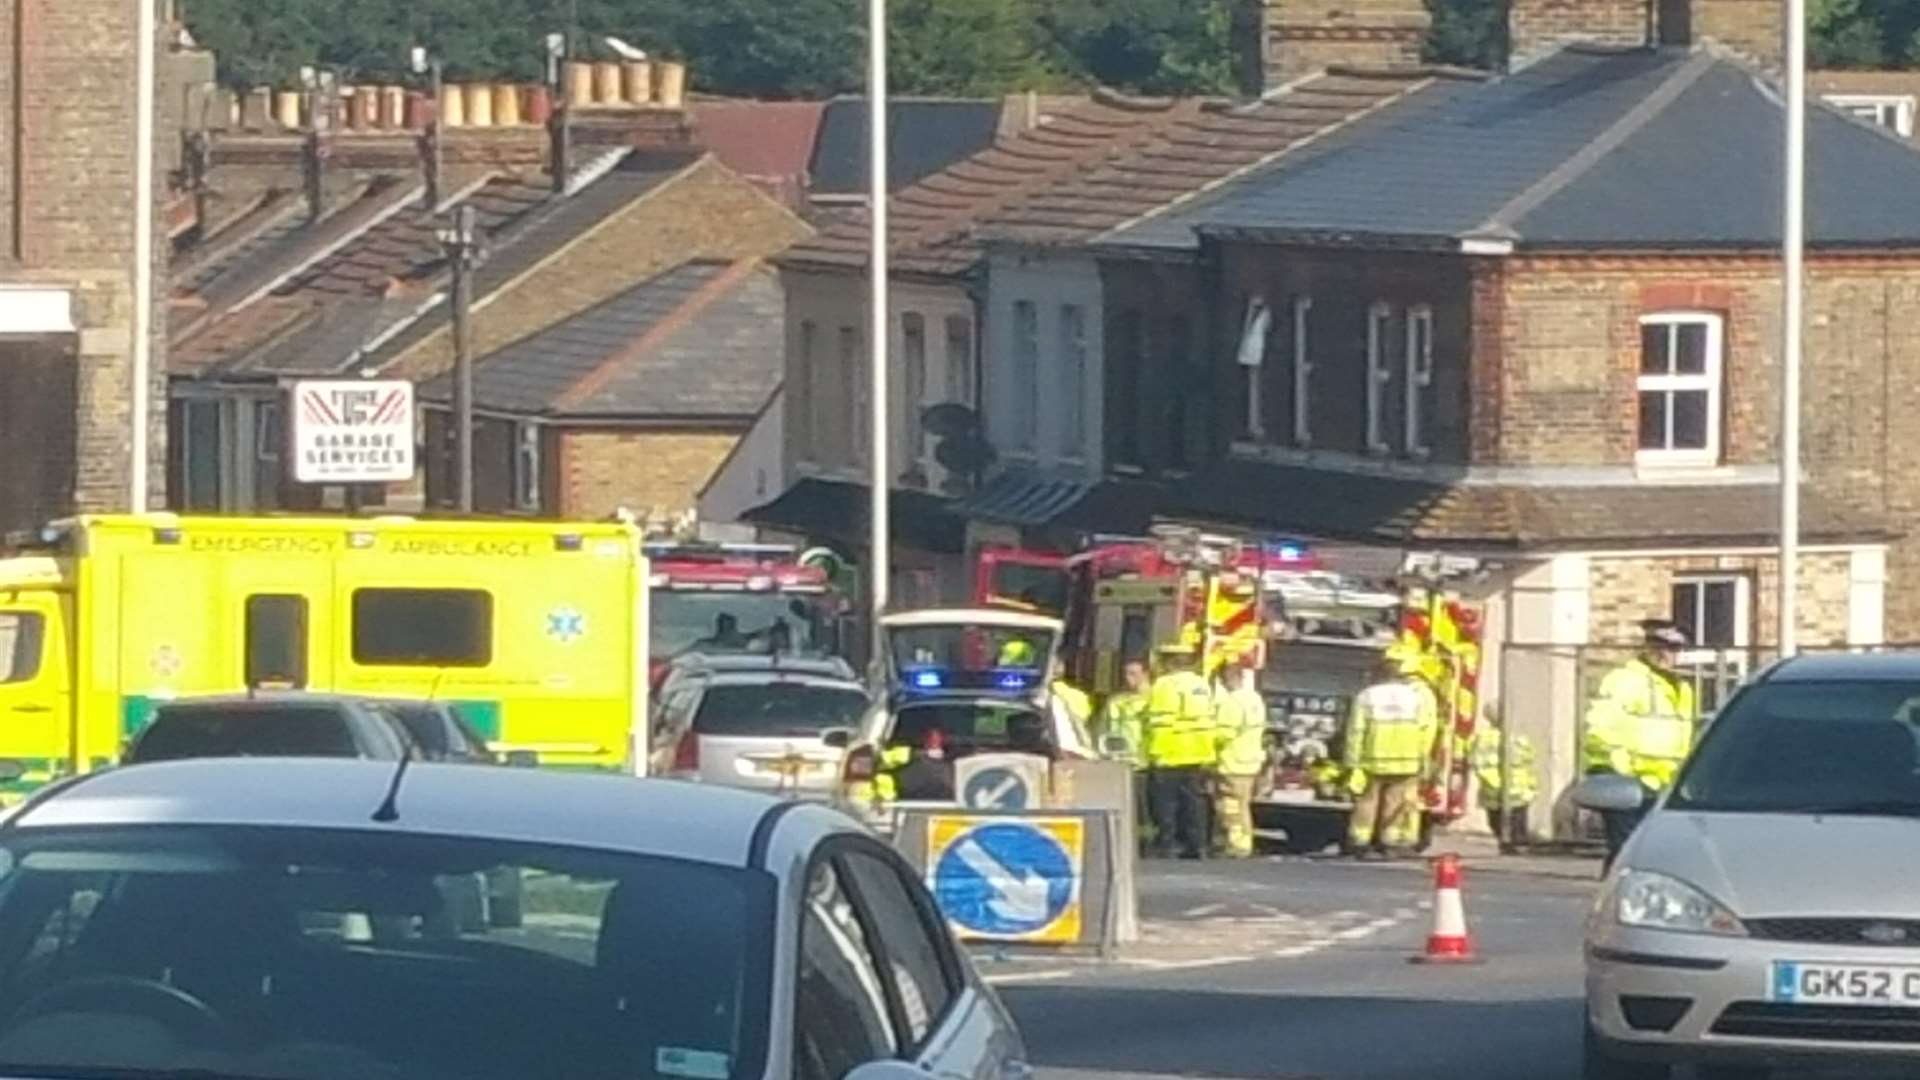 The scene of the accident in Margate Road